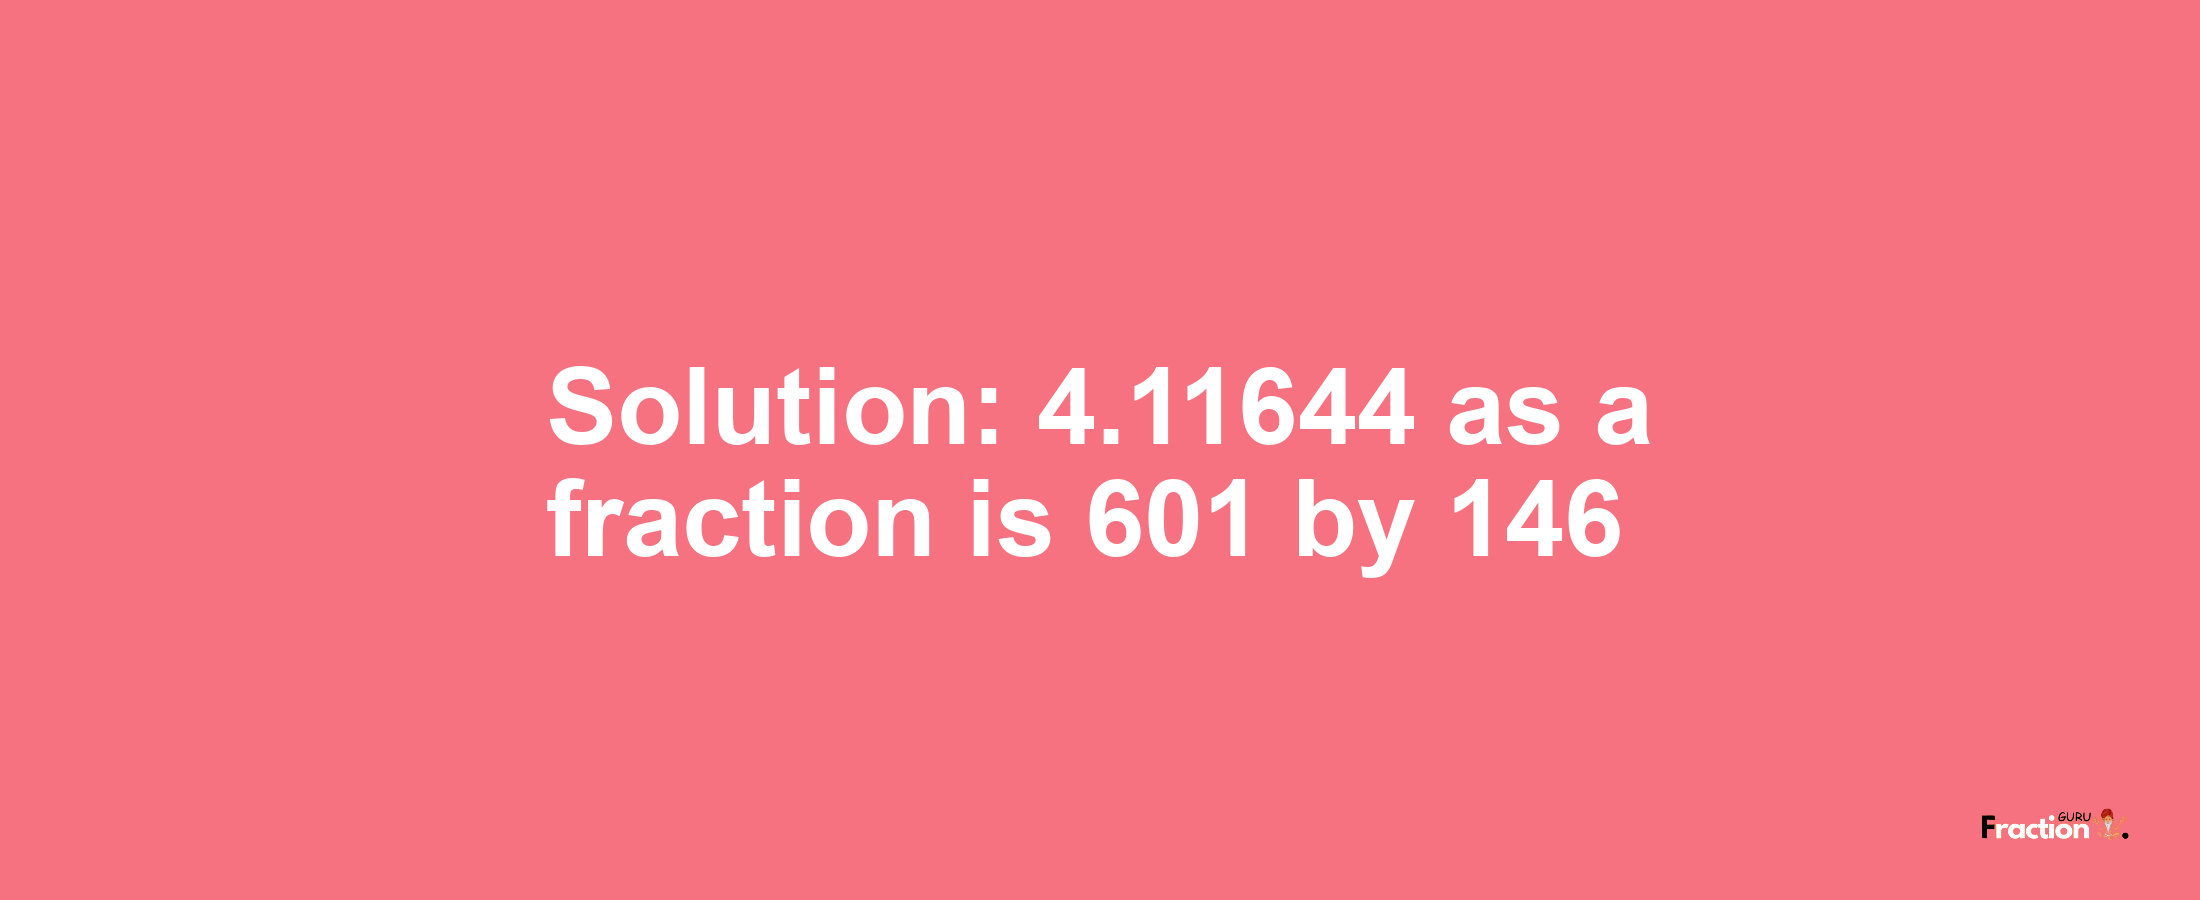 Solution:4.11644 as a fraction is 601/146